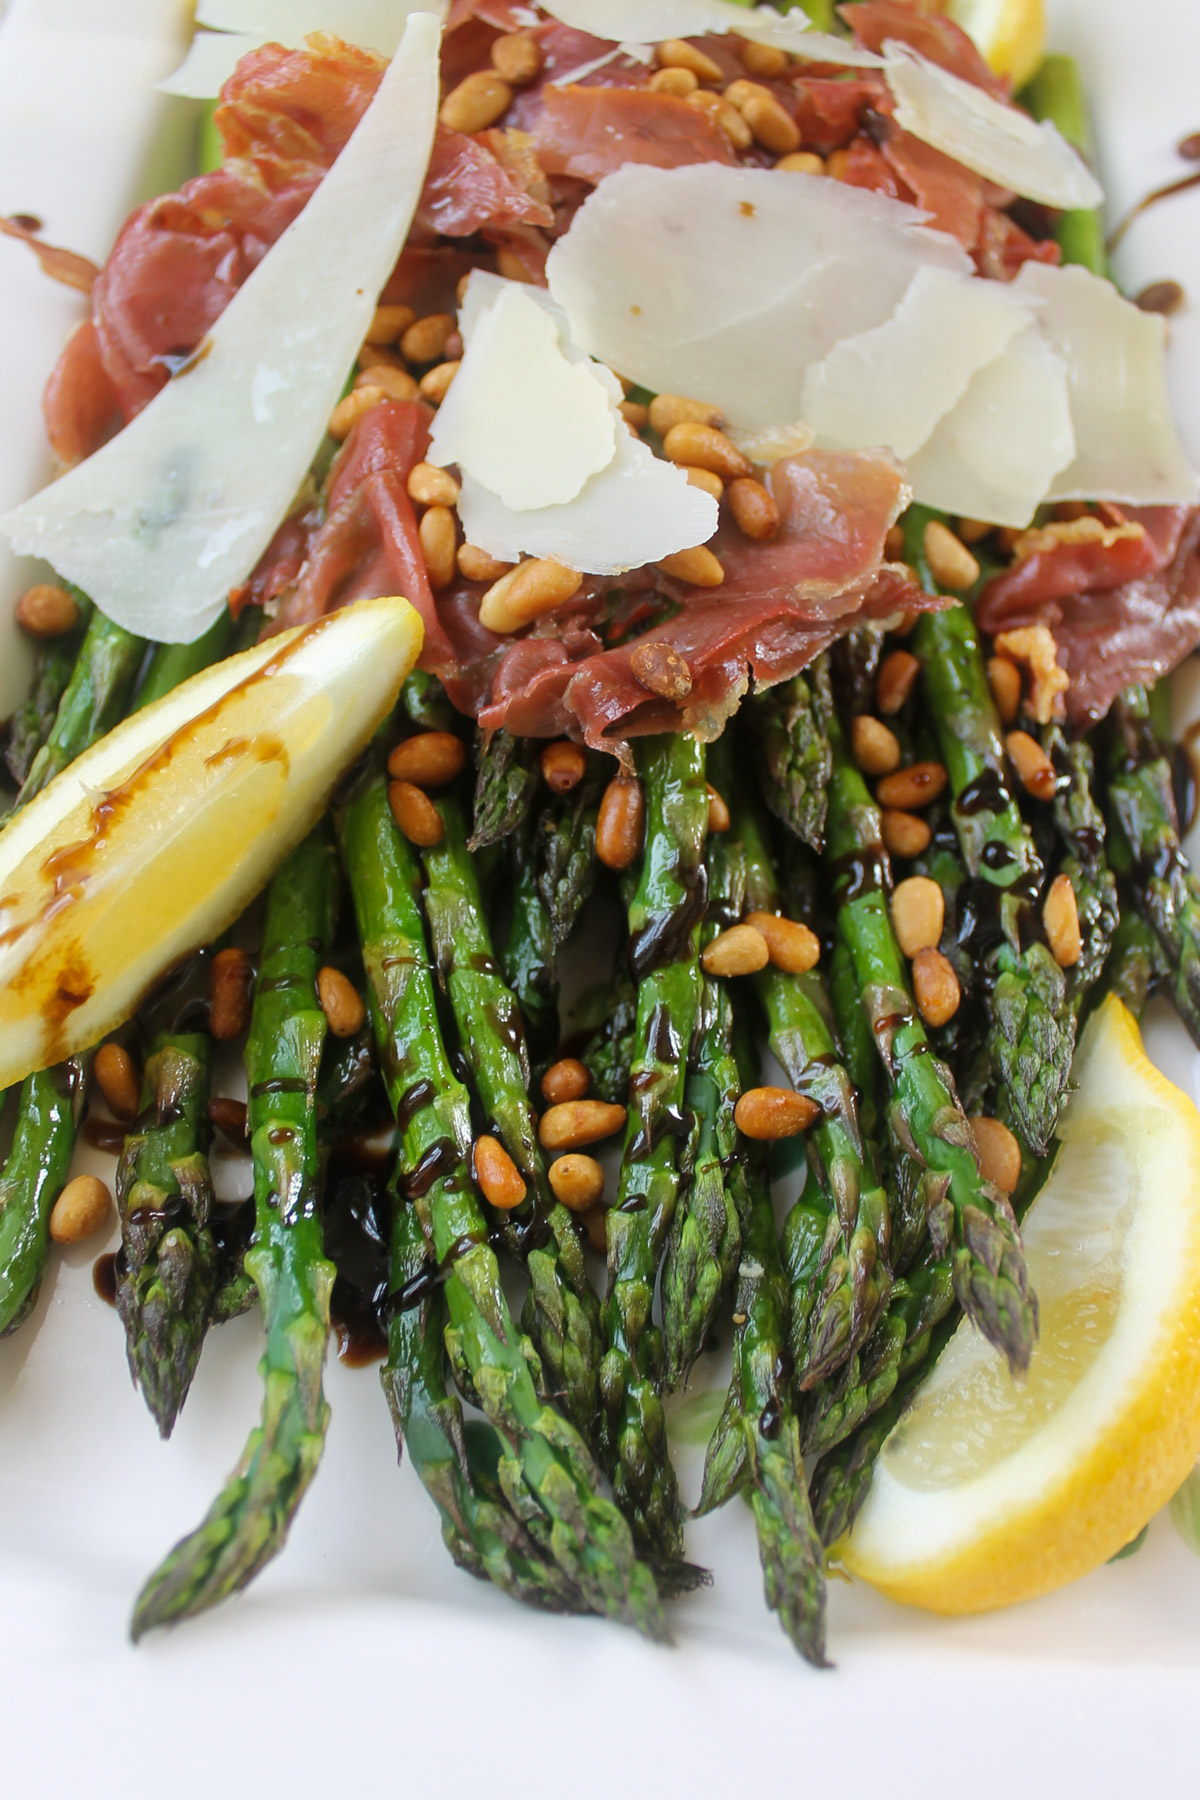 Toasted pine nuts over roasted asparagus drizzled with balsamic glaze.